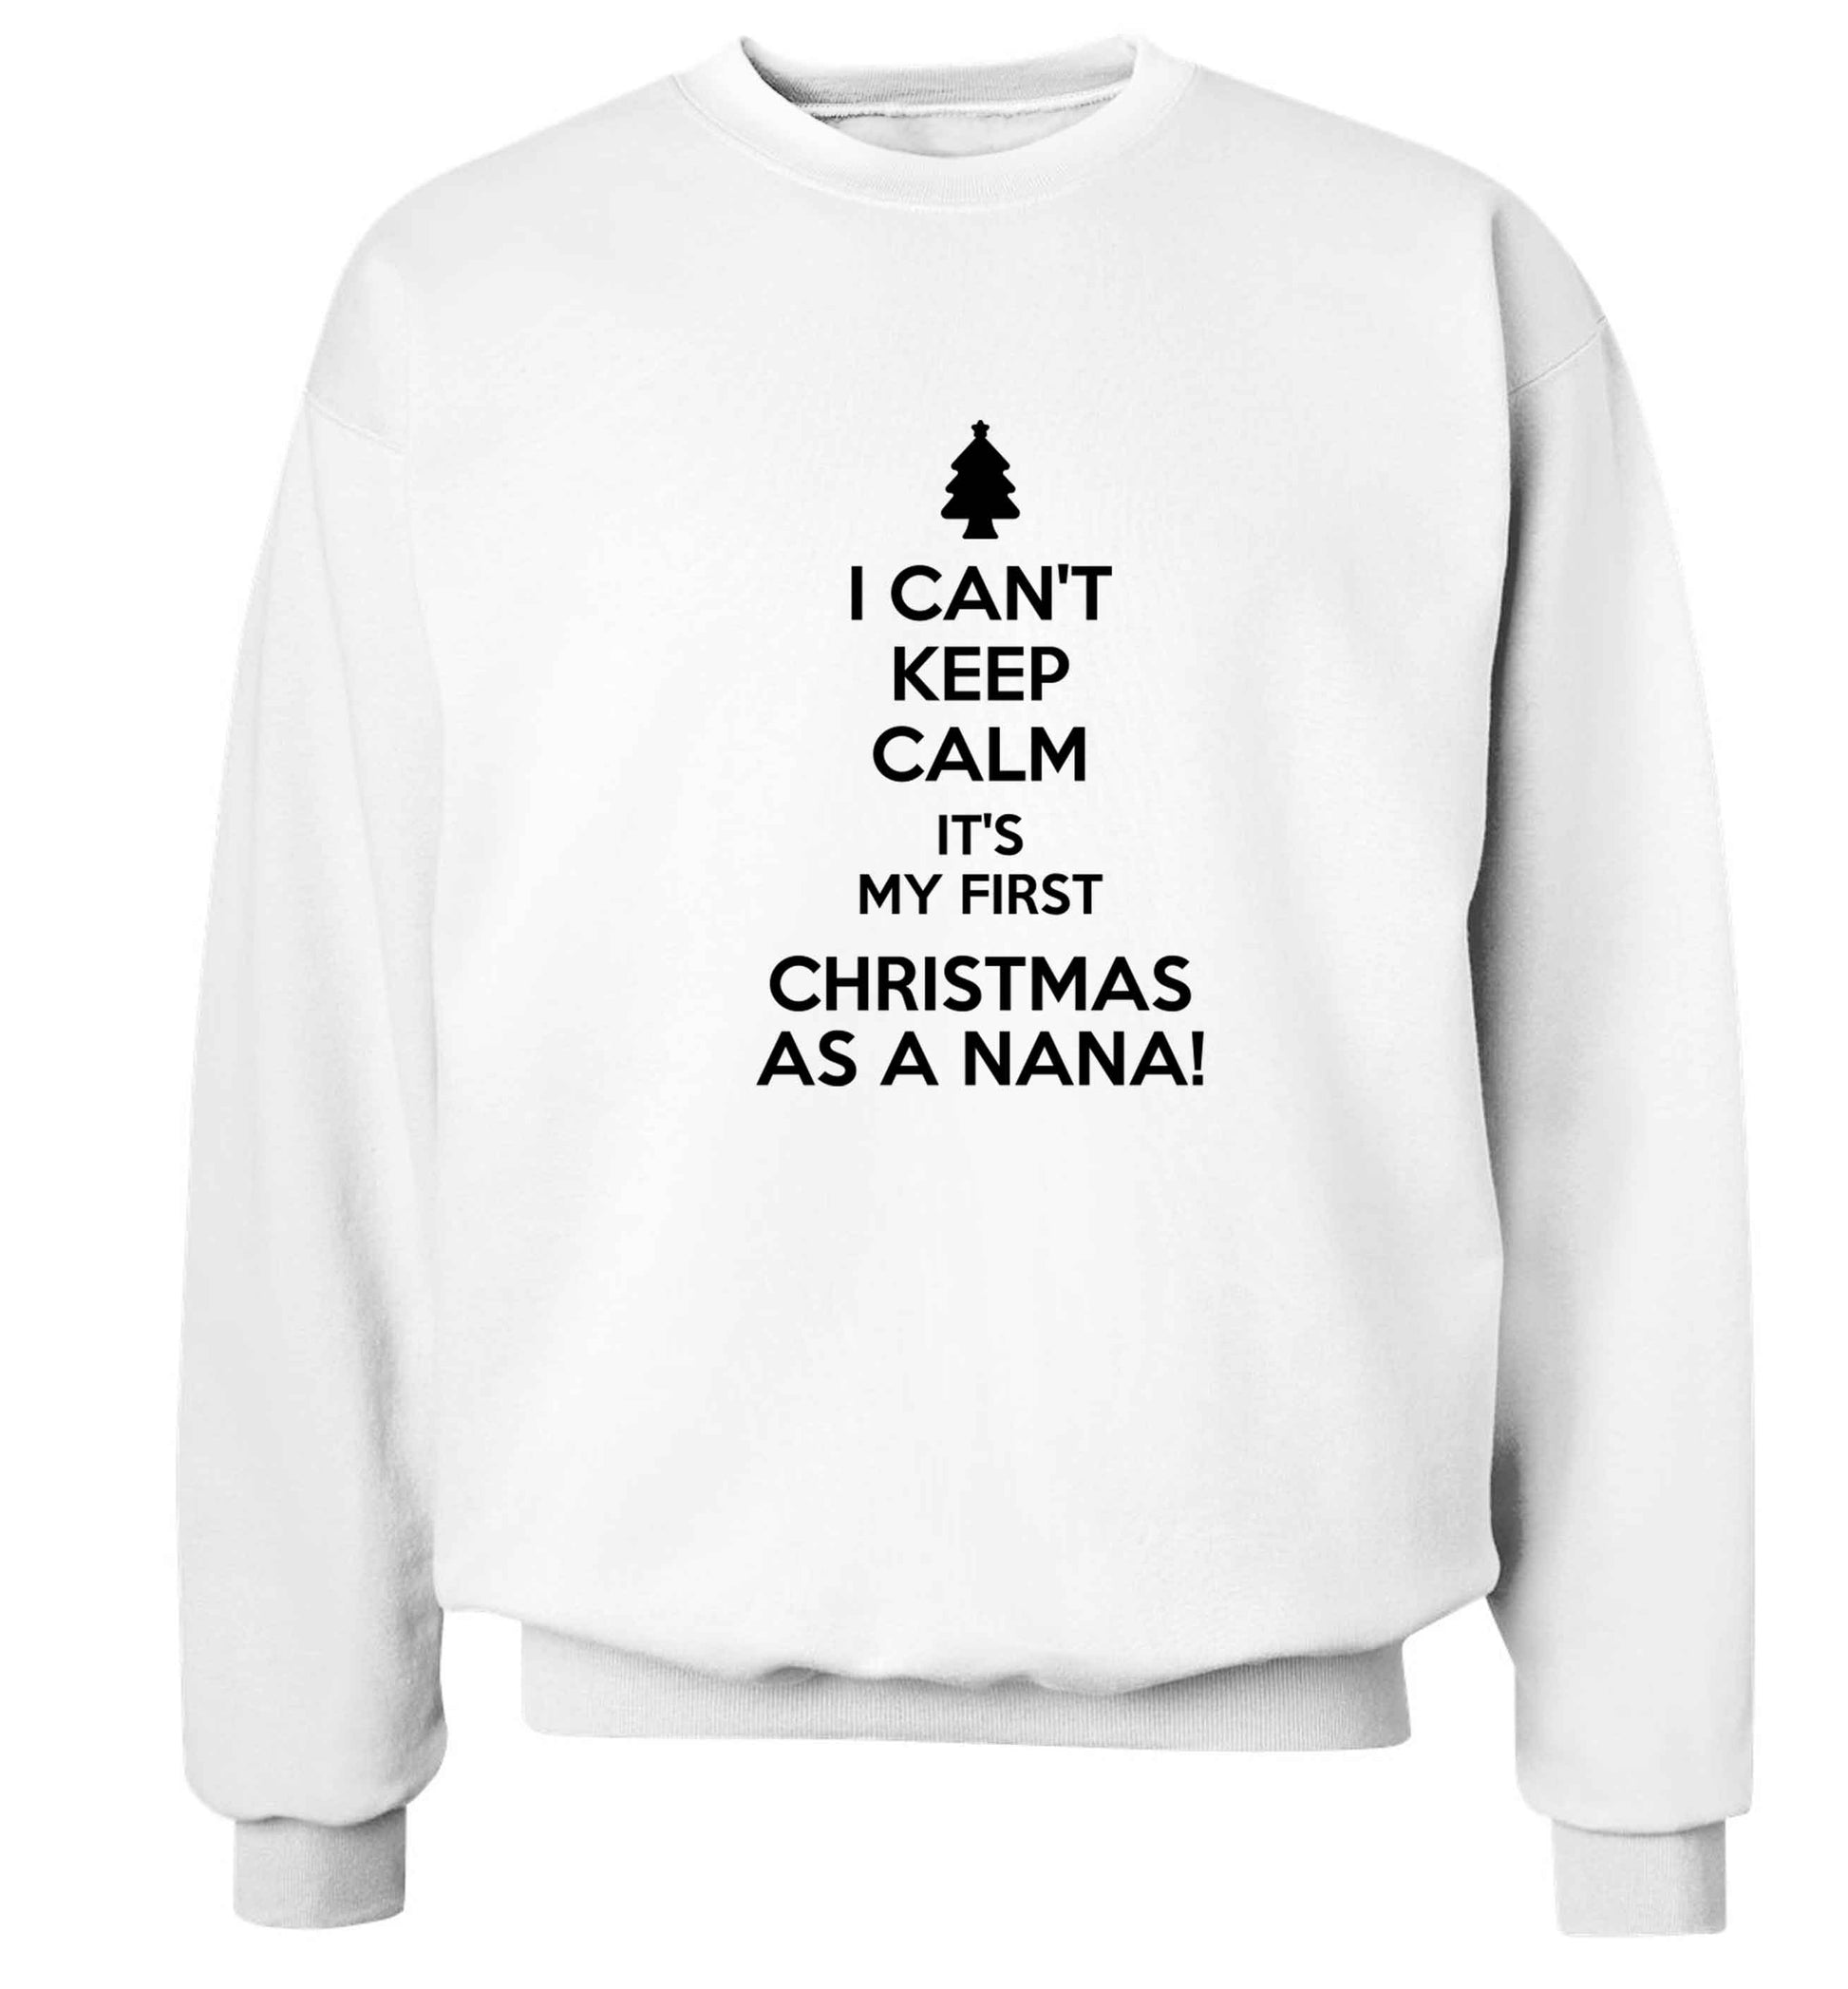 I can't keep calm it's my first Christmas as a nana! Adult's unisex white Sweater 2XL